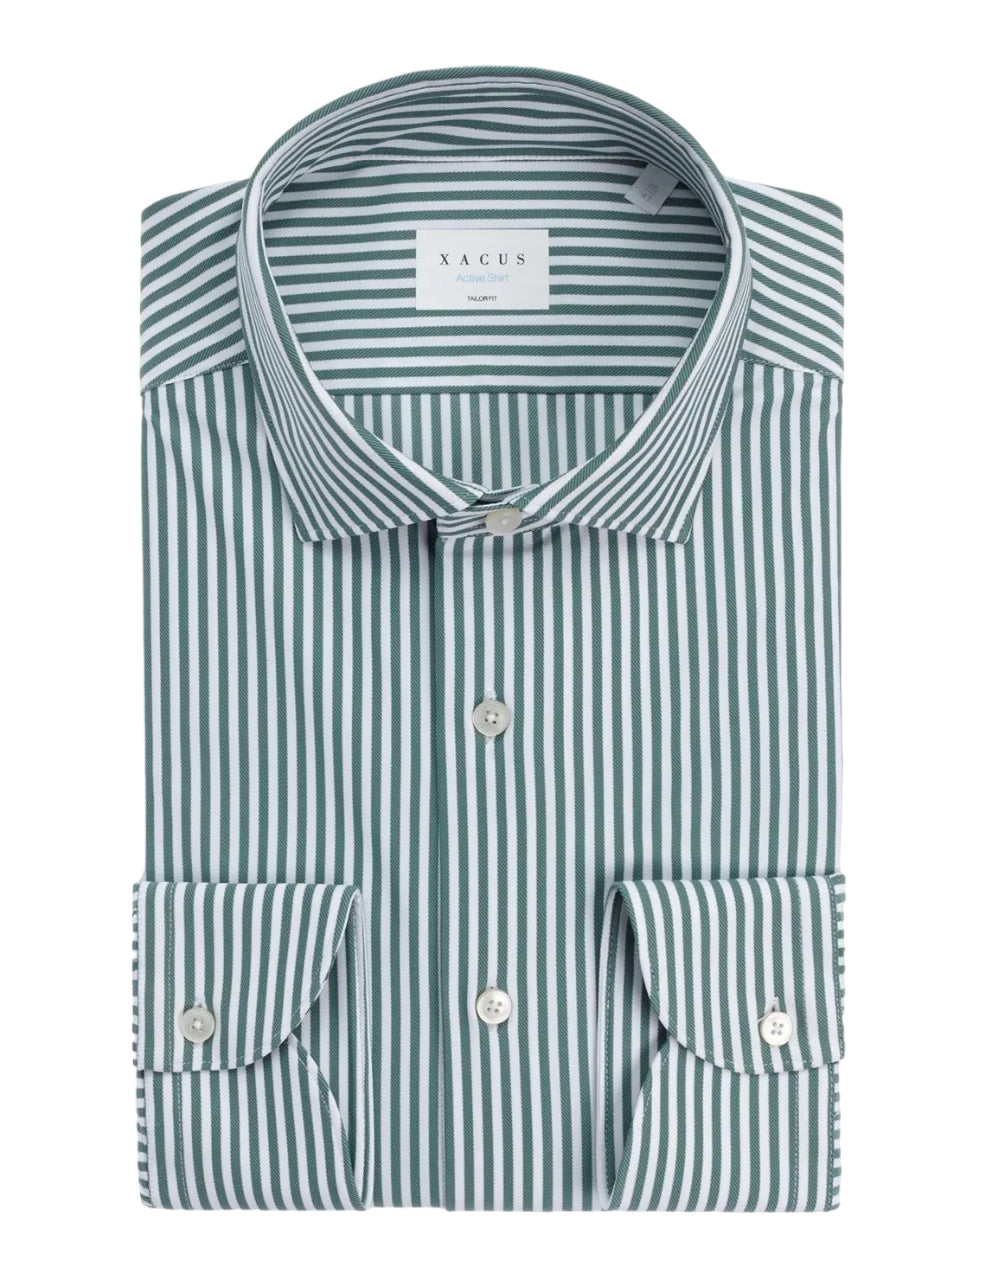 XACUS CAMICIA TAILOR FIT/ACTIVE RIGHE TWILL VERDE BOSCO